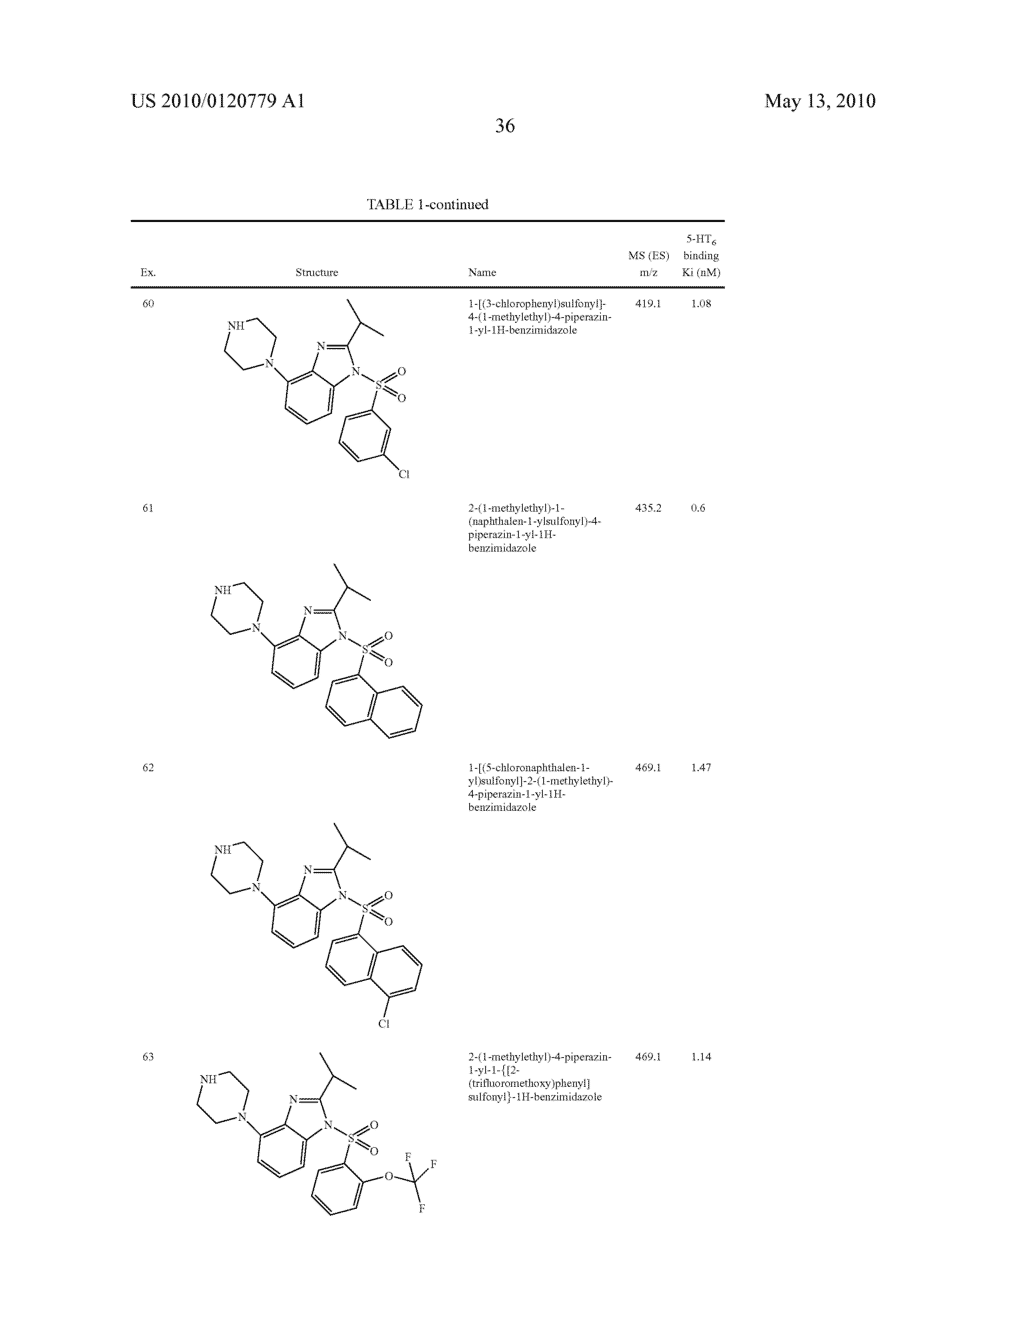 1-(ARYLSULFONYL)-4-(PIPERAZIN-1-YL)-1H-BENZIMIDAZOLES AS 5-HYDROXYTRYPTAMINE-6 LIGANDS - diagram, schematic, and image 37